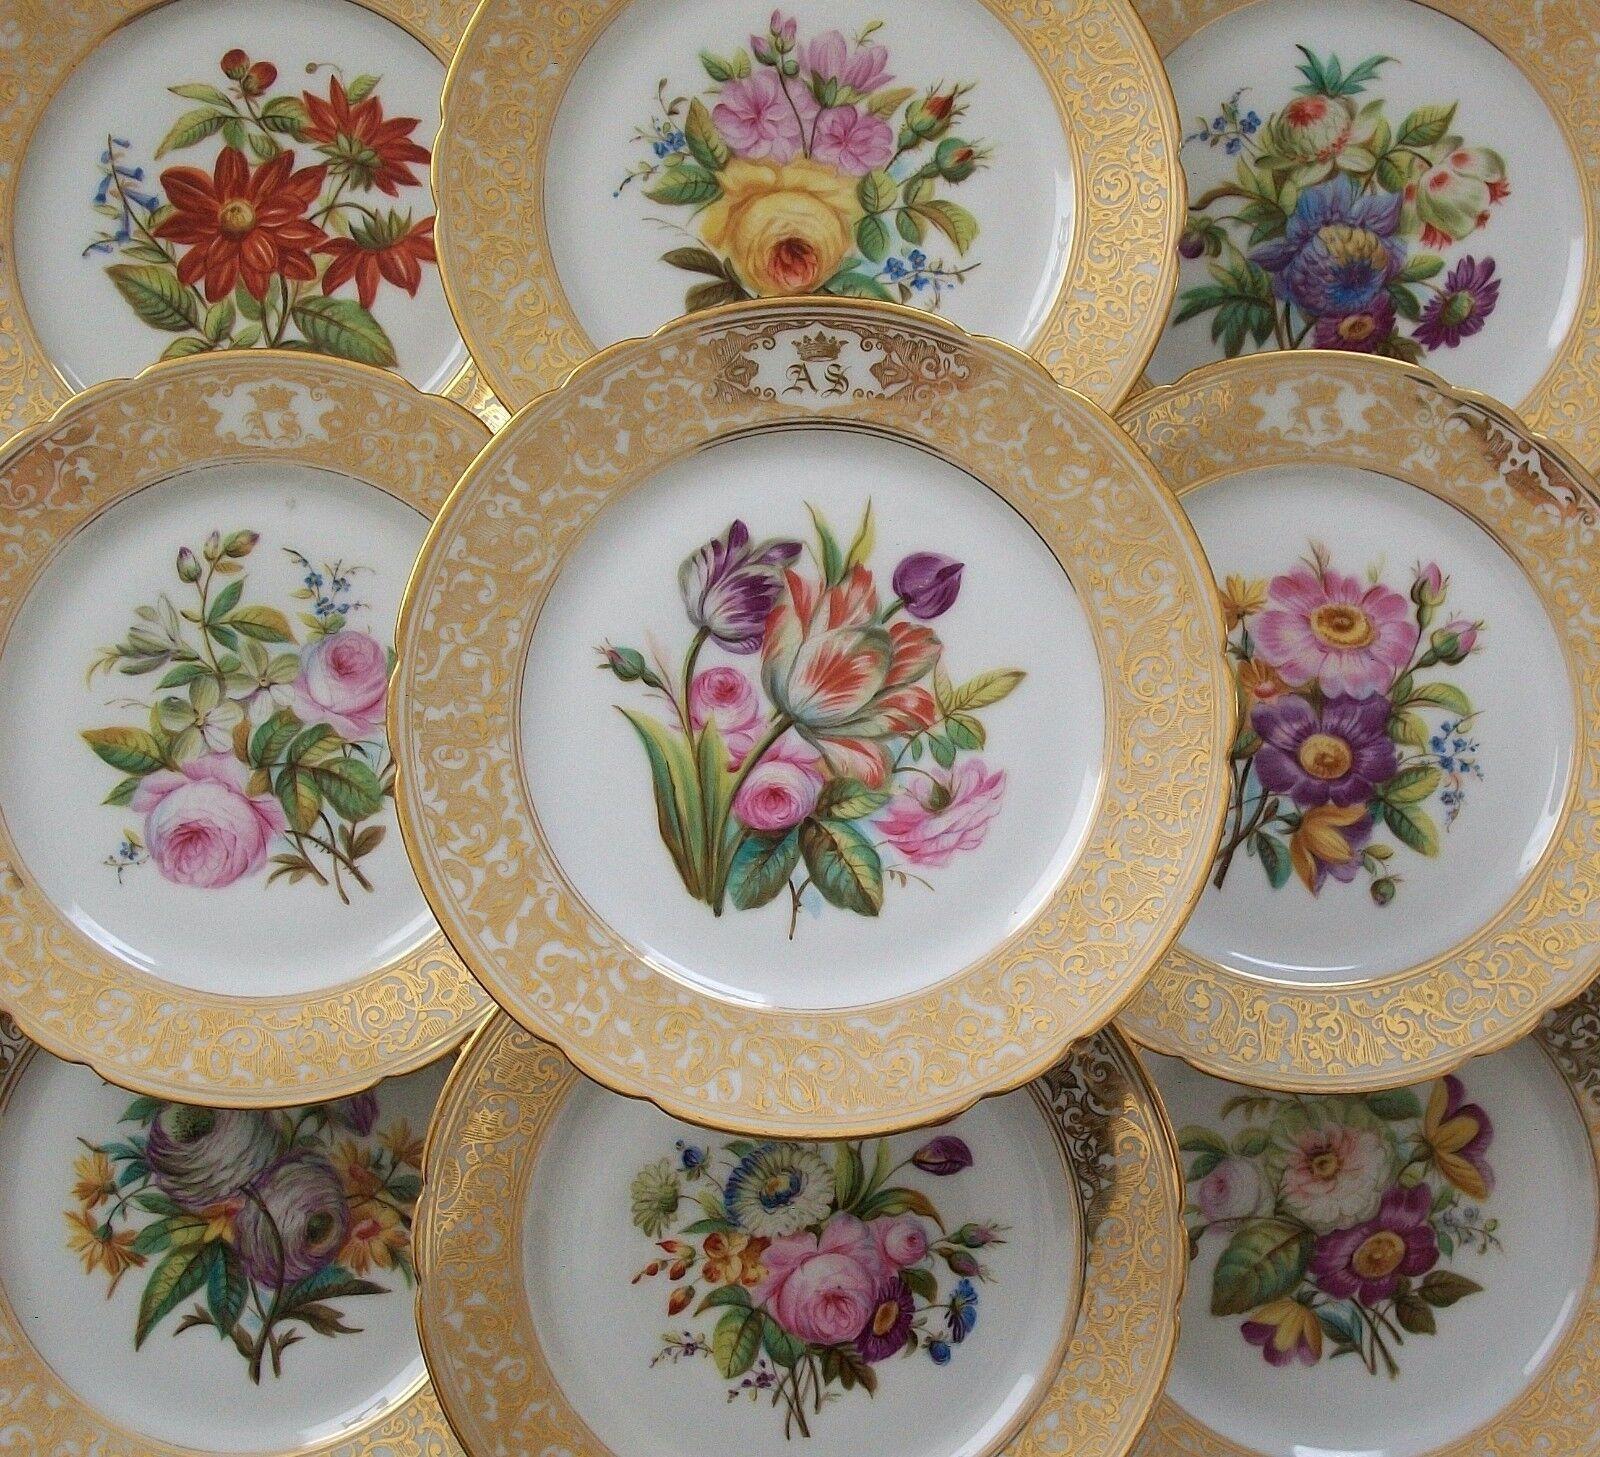 Robert À Paris - Fine quality Paris Porcelain hand painted cabinet plates - total of nine (9) plates - each plate features a unique floral center - elaborate gilded borders with royal monogram to each - eight plates signed in red script on the back